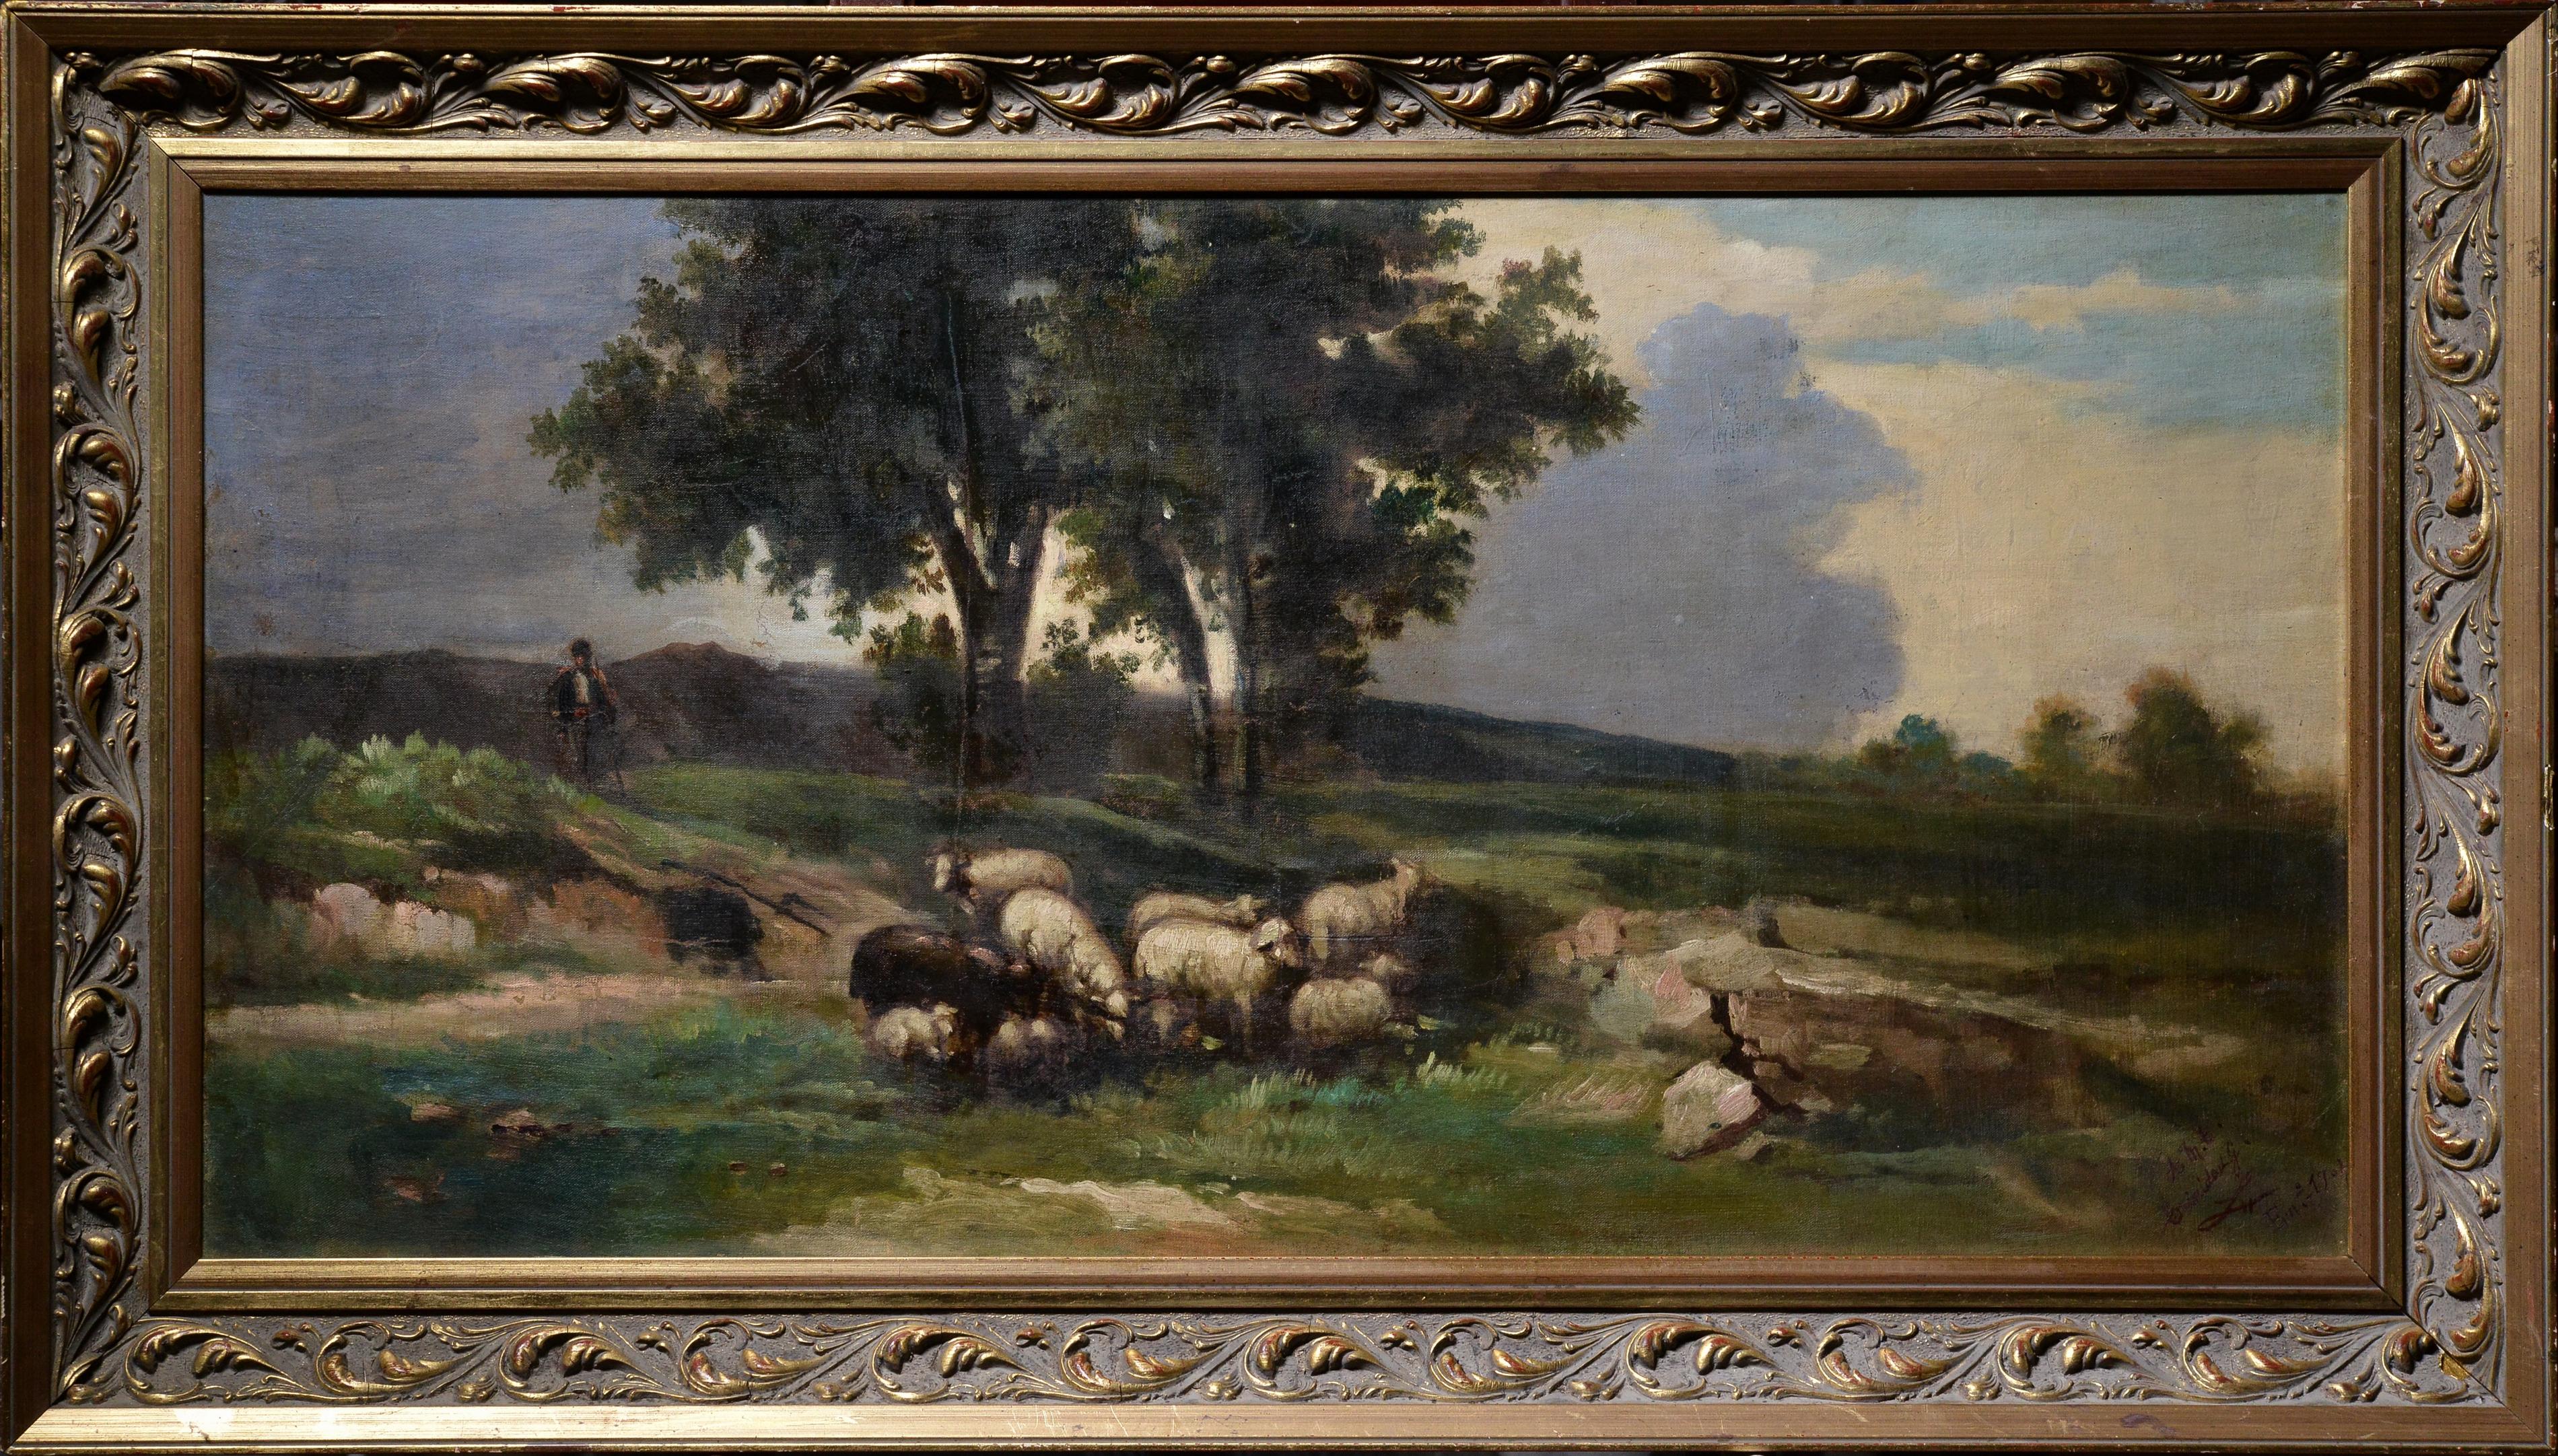 Pastoral landscape Shepherd and Sheep early 20th century Barbizon style